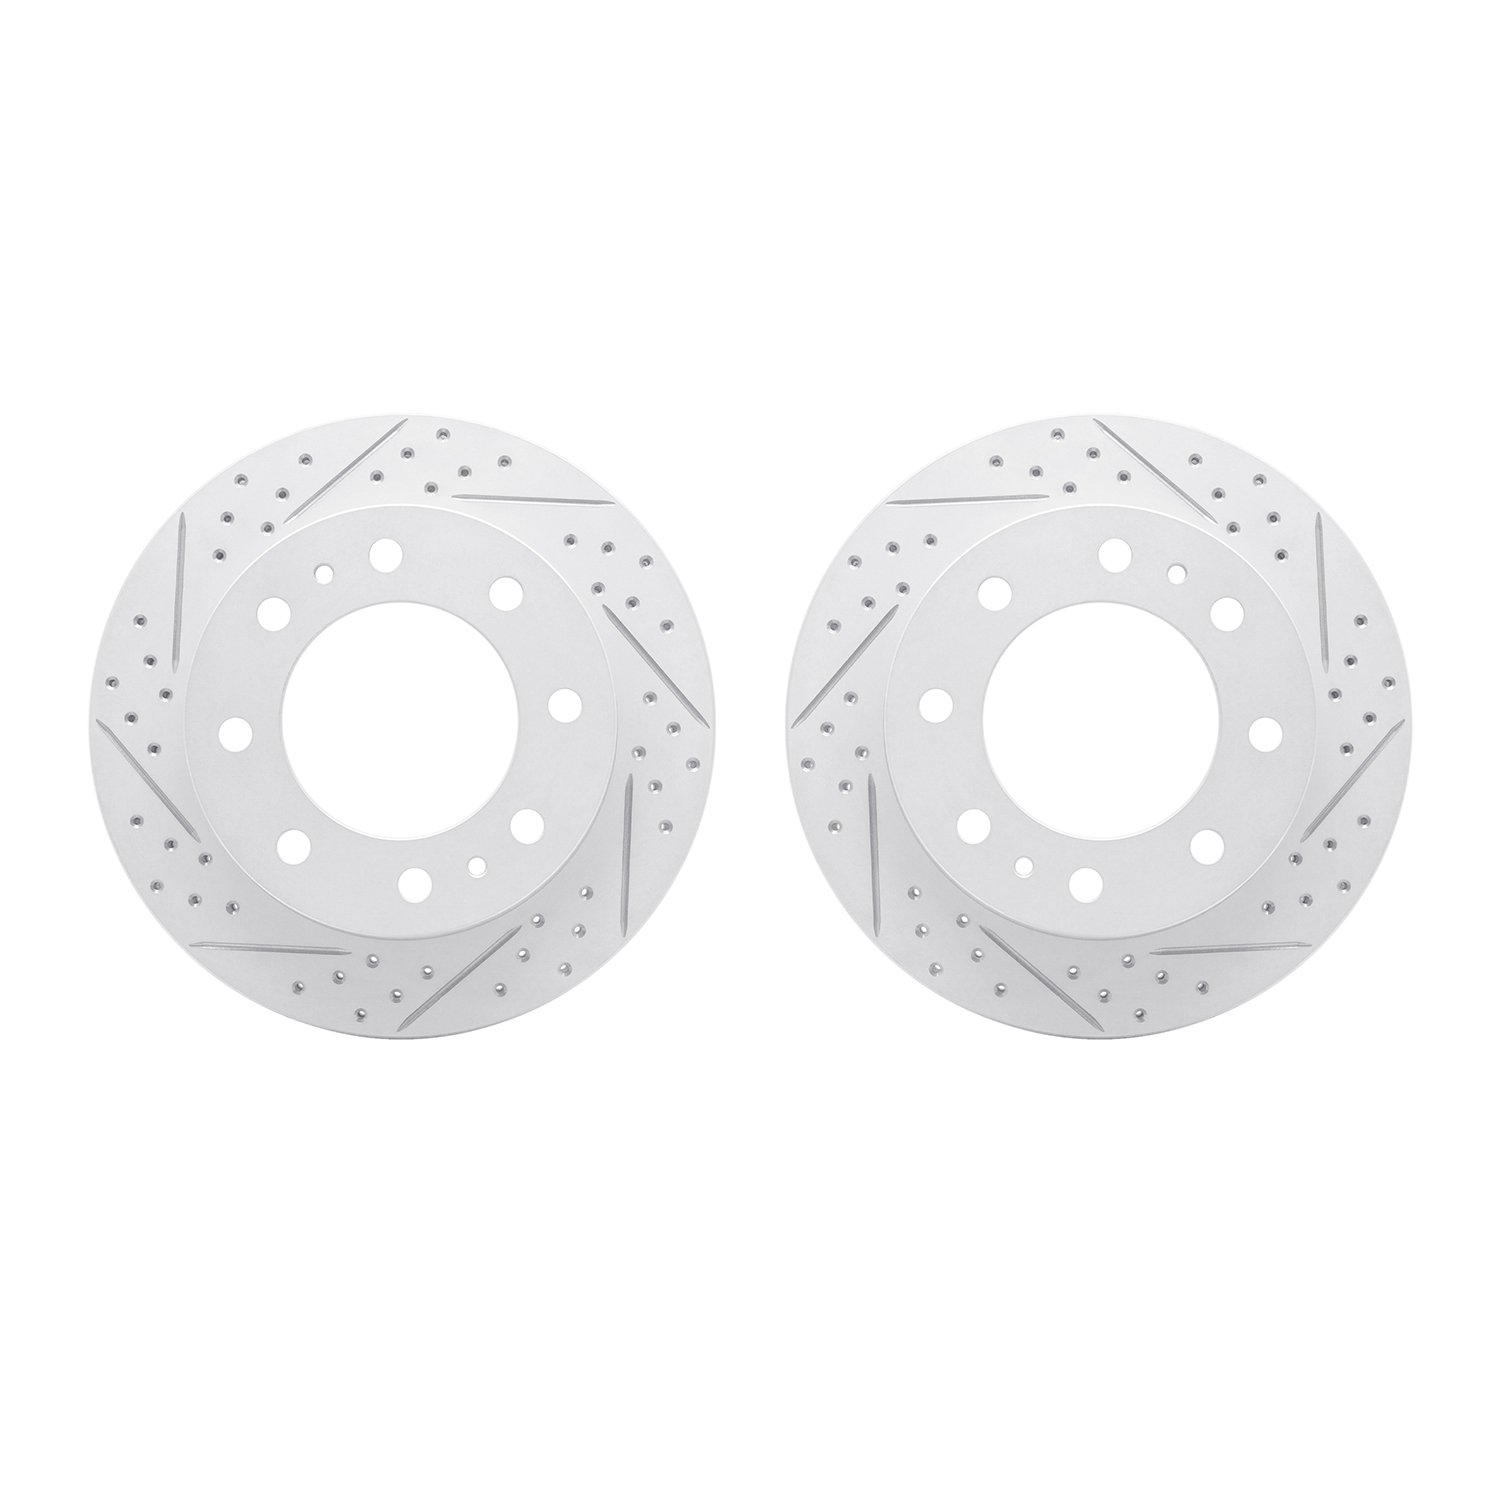 2002-48012 Geoperformance Drilled/Slotted Brake Rotors, Fits Select GM, Position: Front